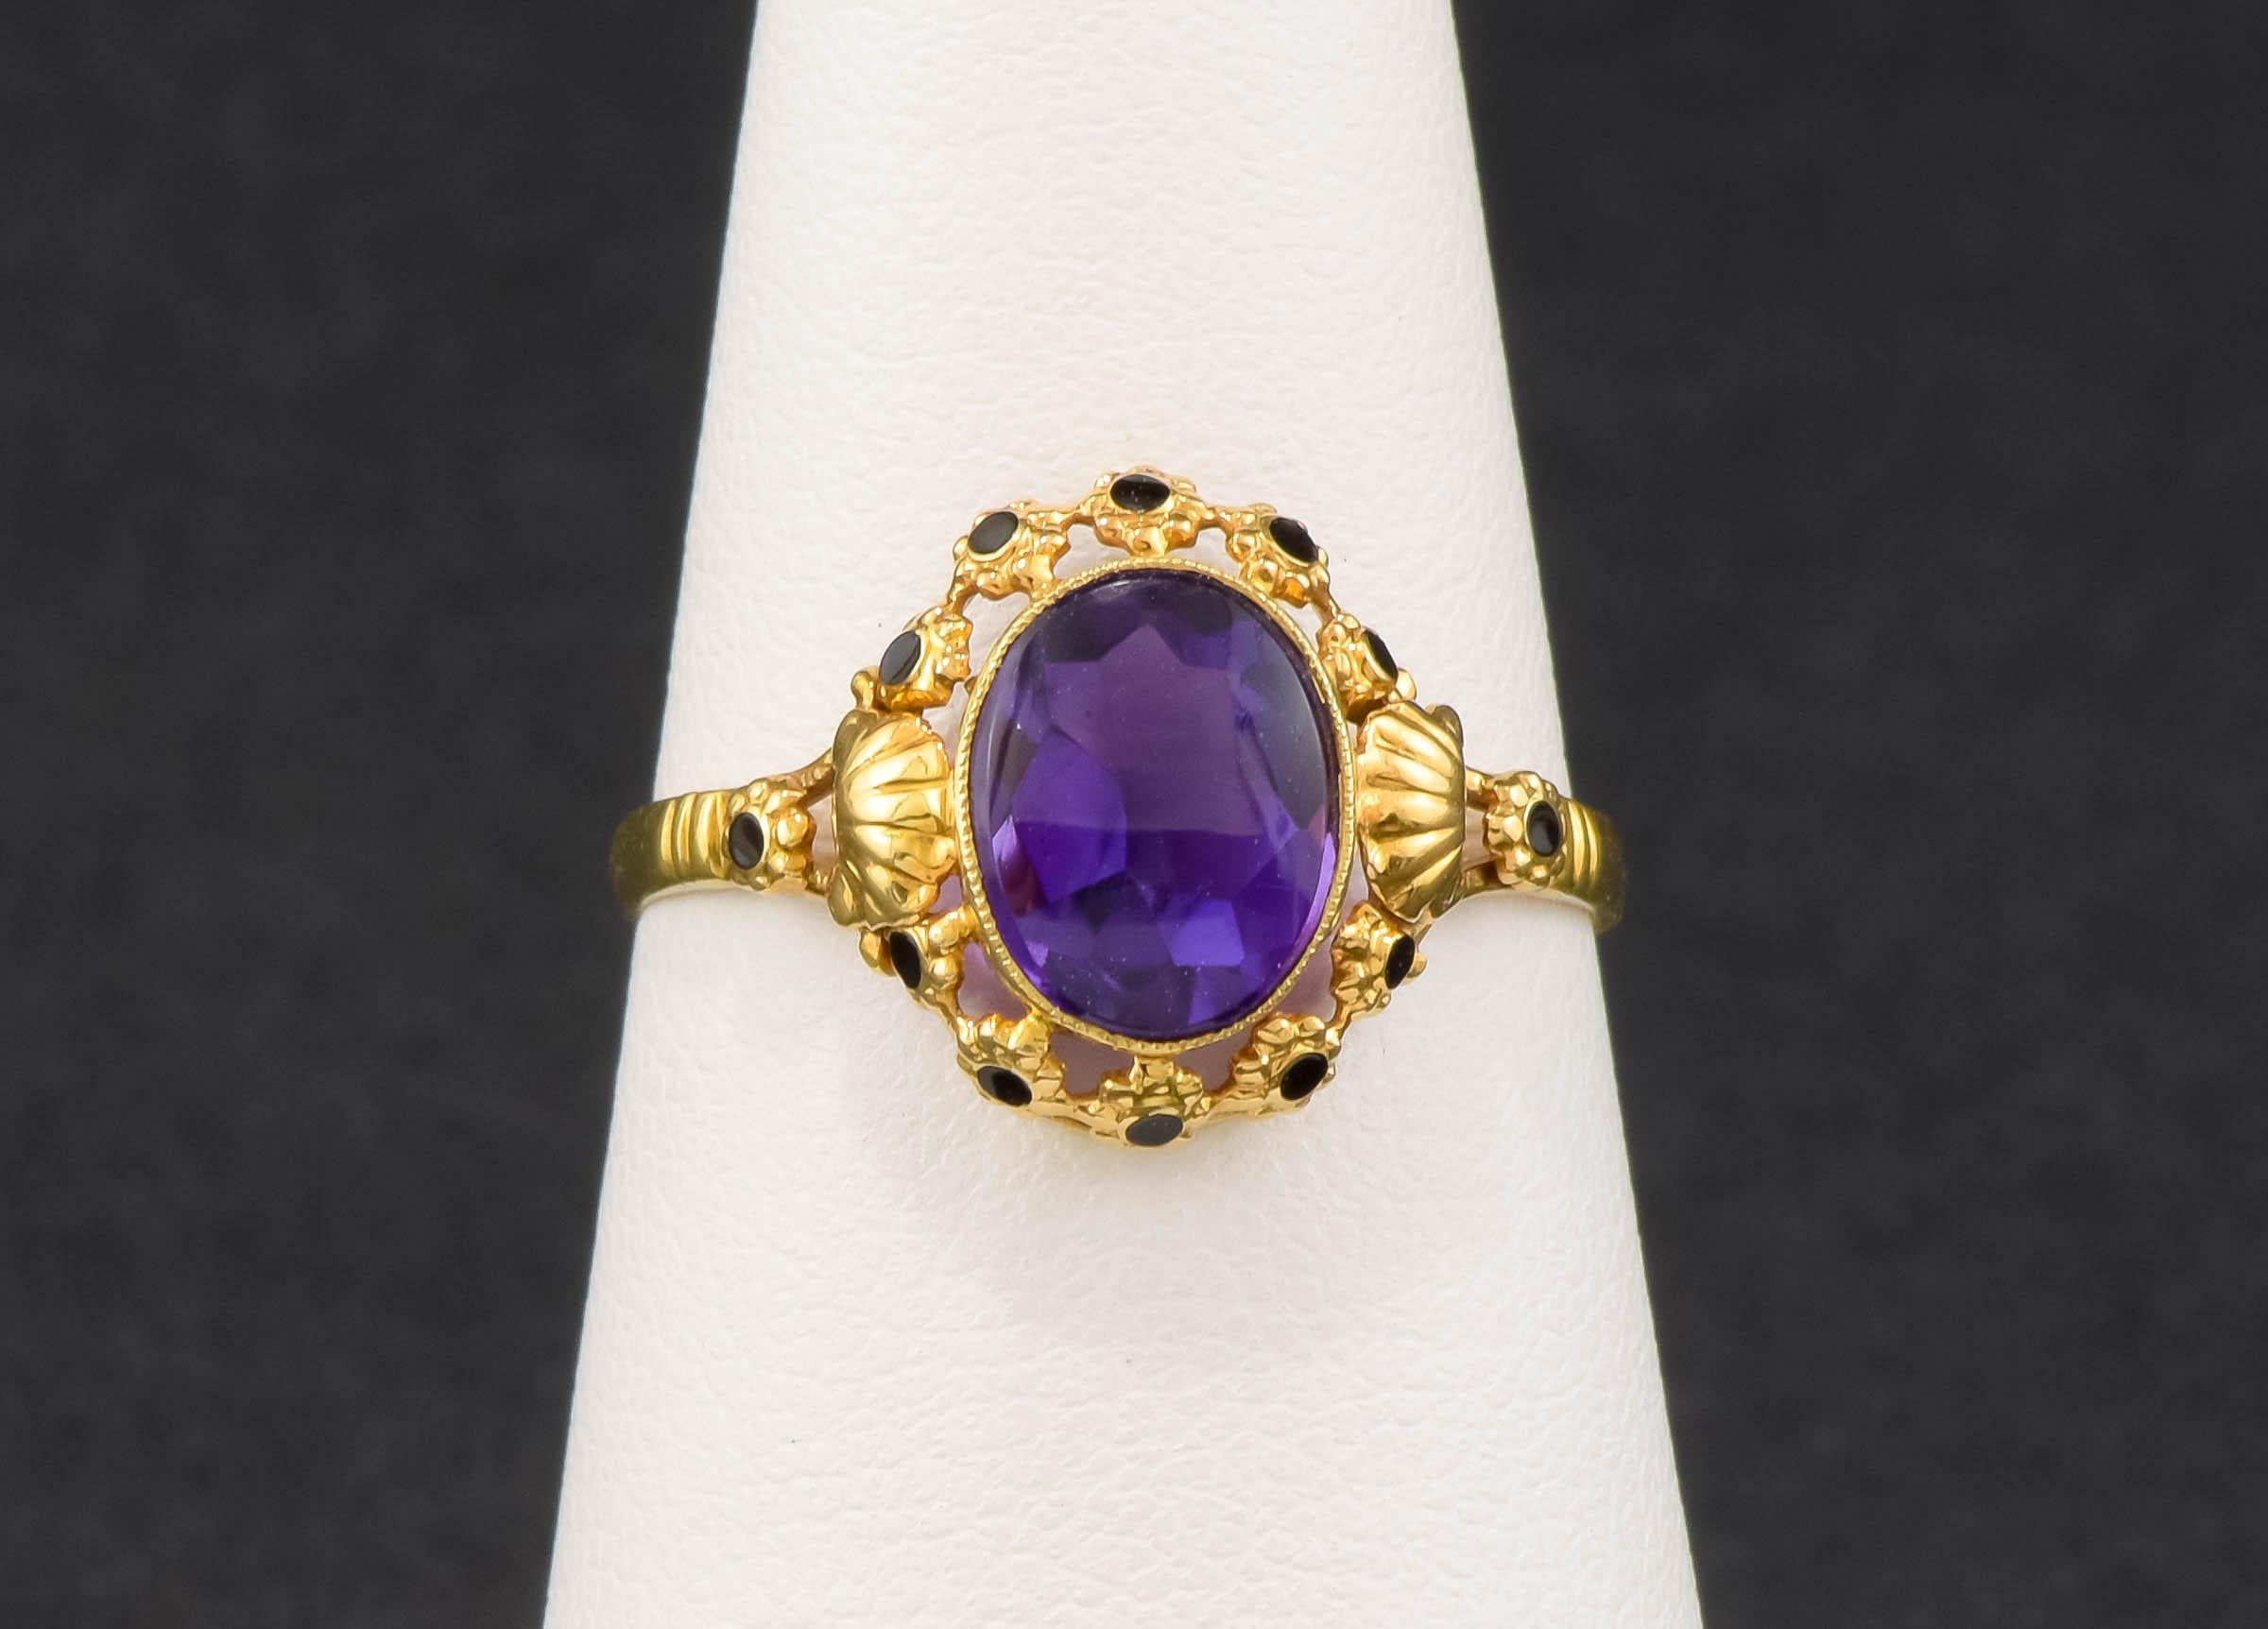 There is nothing quite like the rich purple of a fine amethyst set in high karat gold - add black enamel and beautiful details to make it really special.

Crafted of 18K yellow gold (with a small sized area at the back testing as 9K gold), the ring